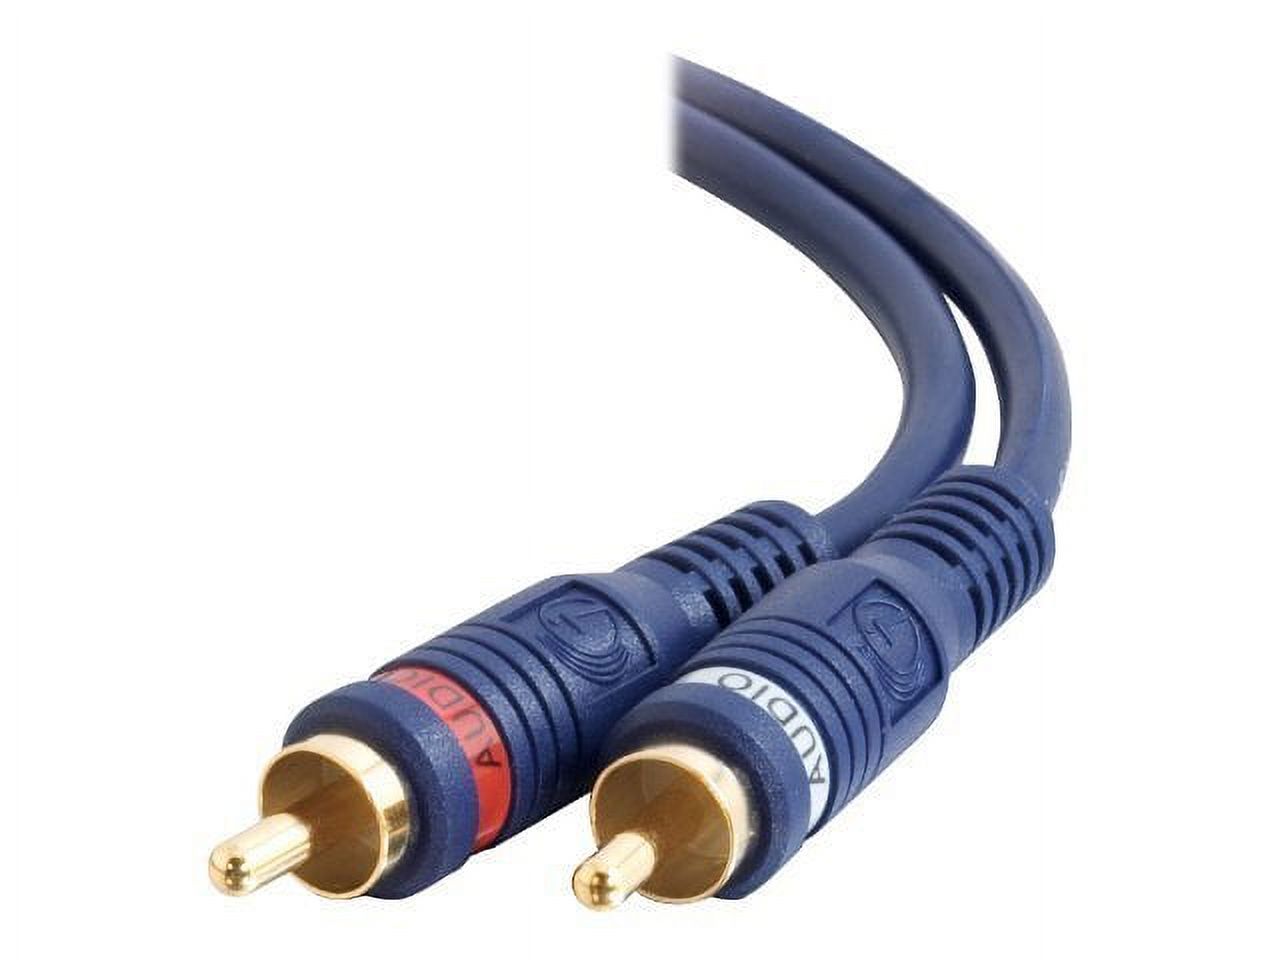 C2G Velocity 100ft Velocity RCA Stereo Audio Cable - audio cable - 100 ft - image 2 of 4